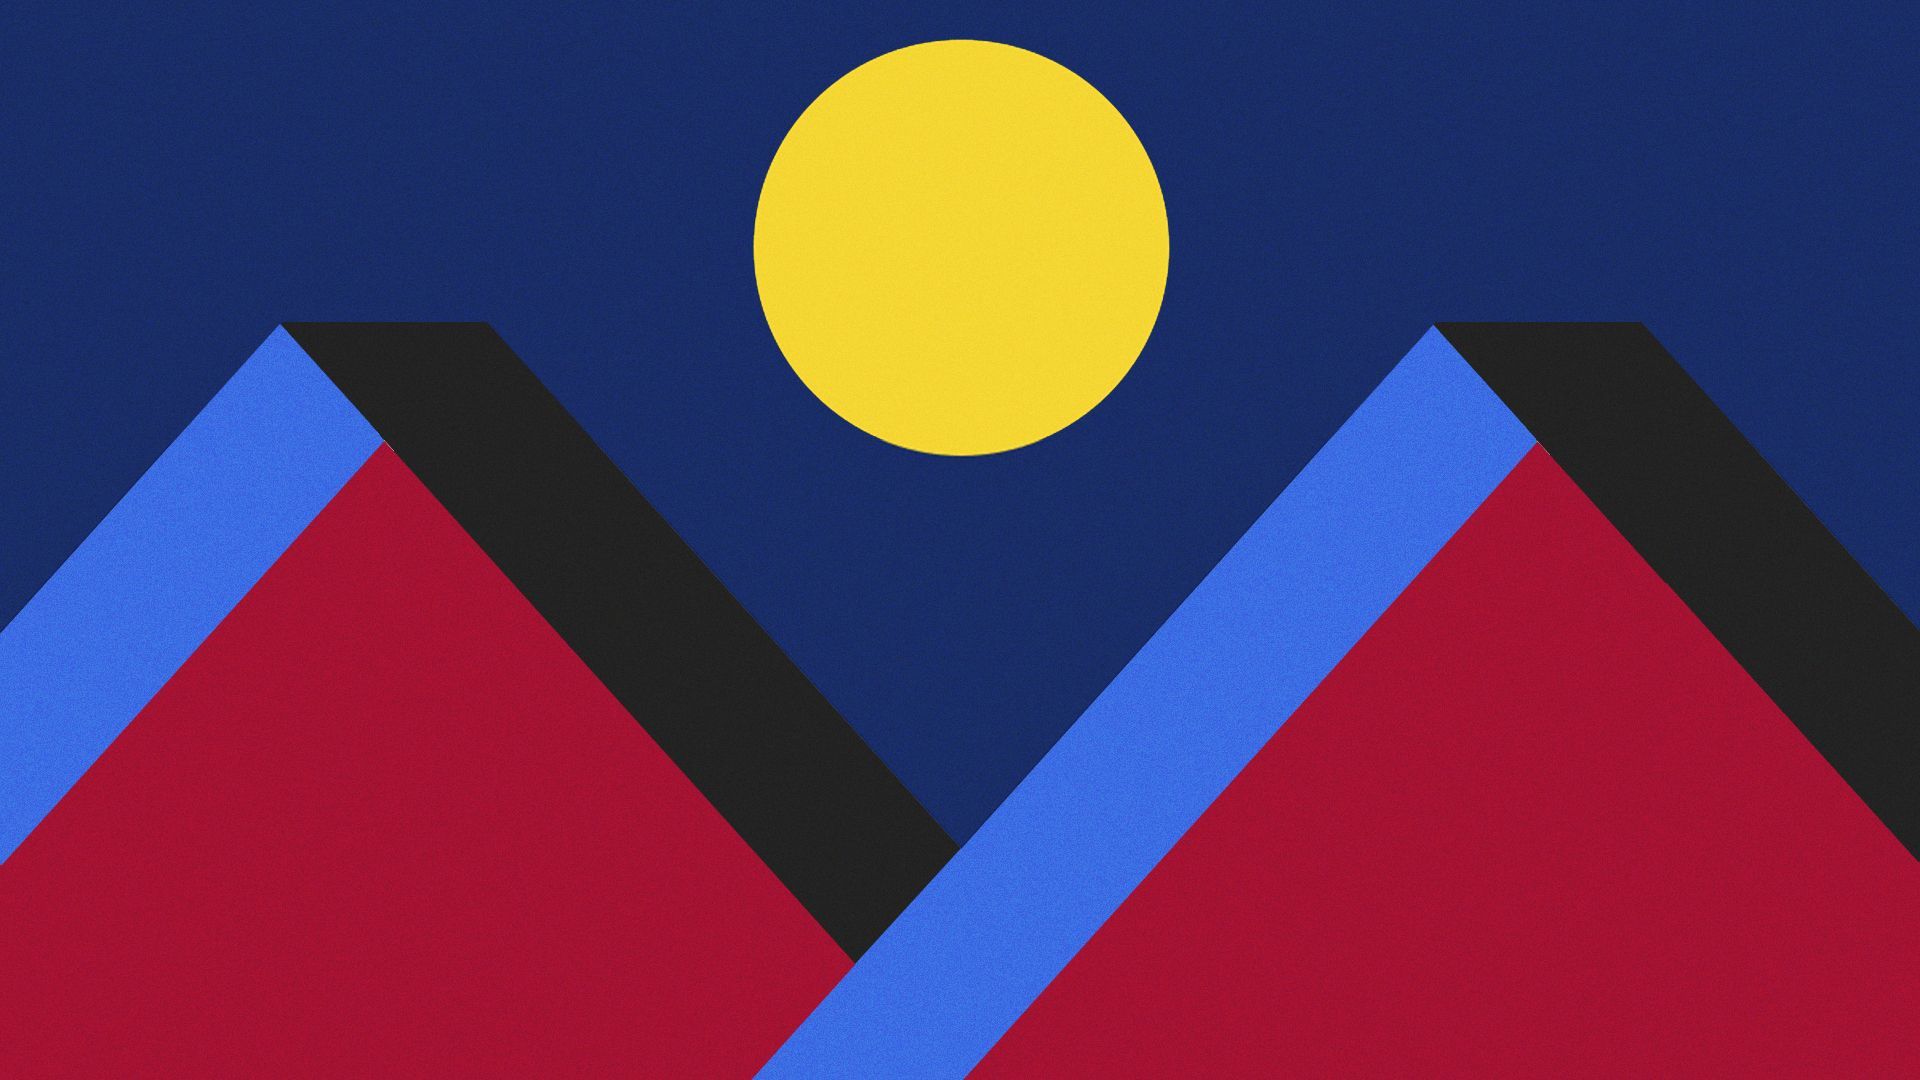 Illustration of the flag of Denver with the Axios logo in the place of the mountains.